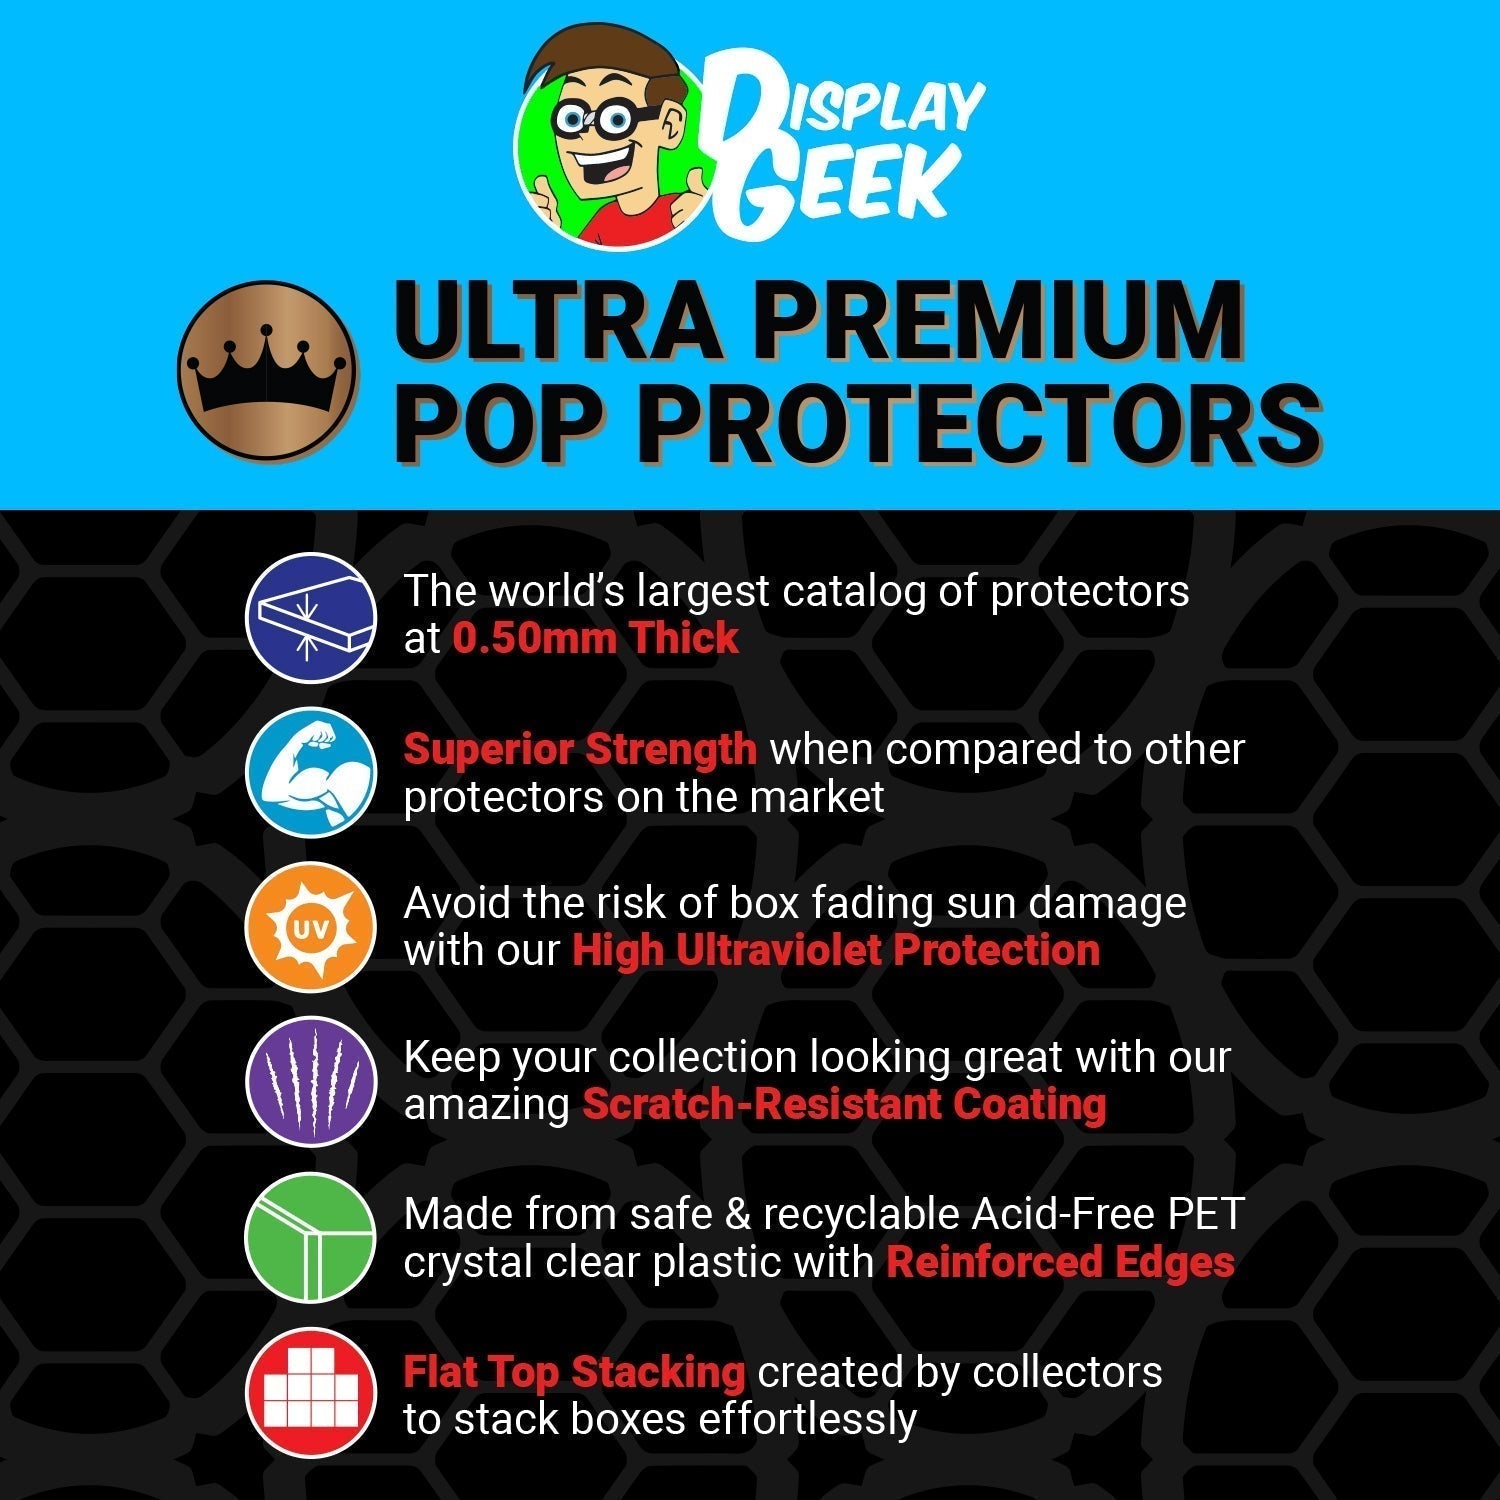 Pop Protector for Pop & Tee Demon Slayer Rui Glow #1307 Funko Box - PPG Pop Protector Guide Search Created by Display Geek